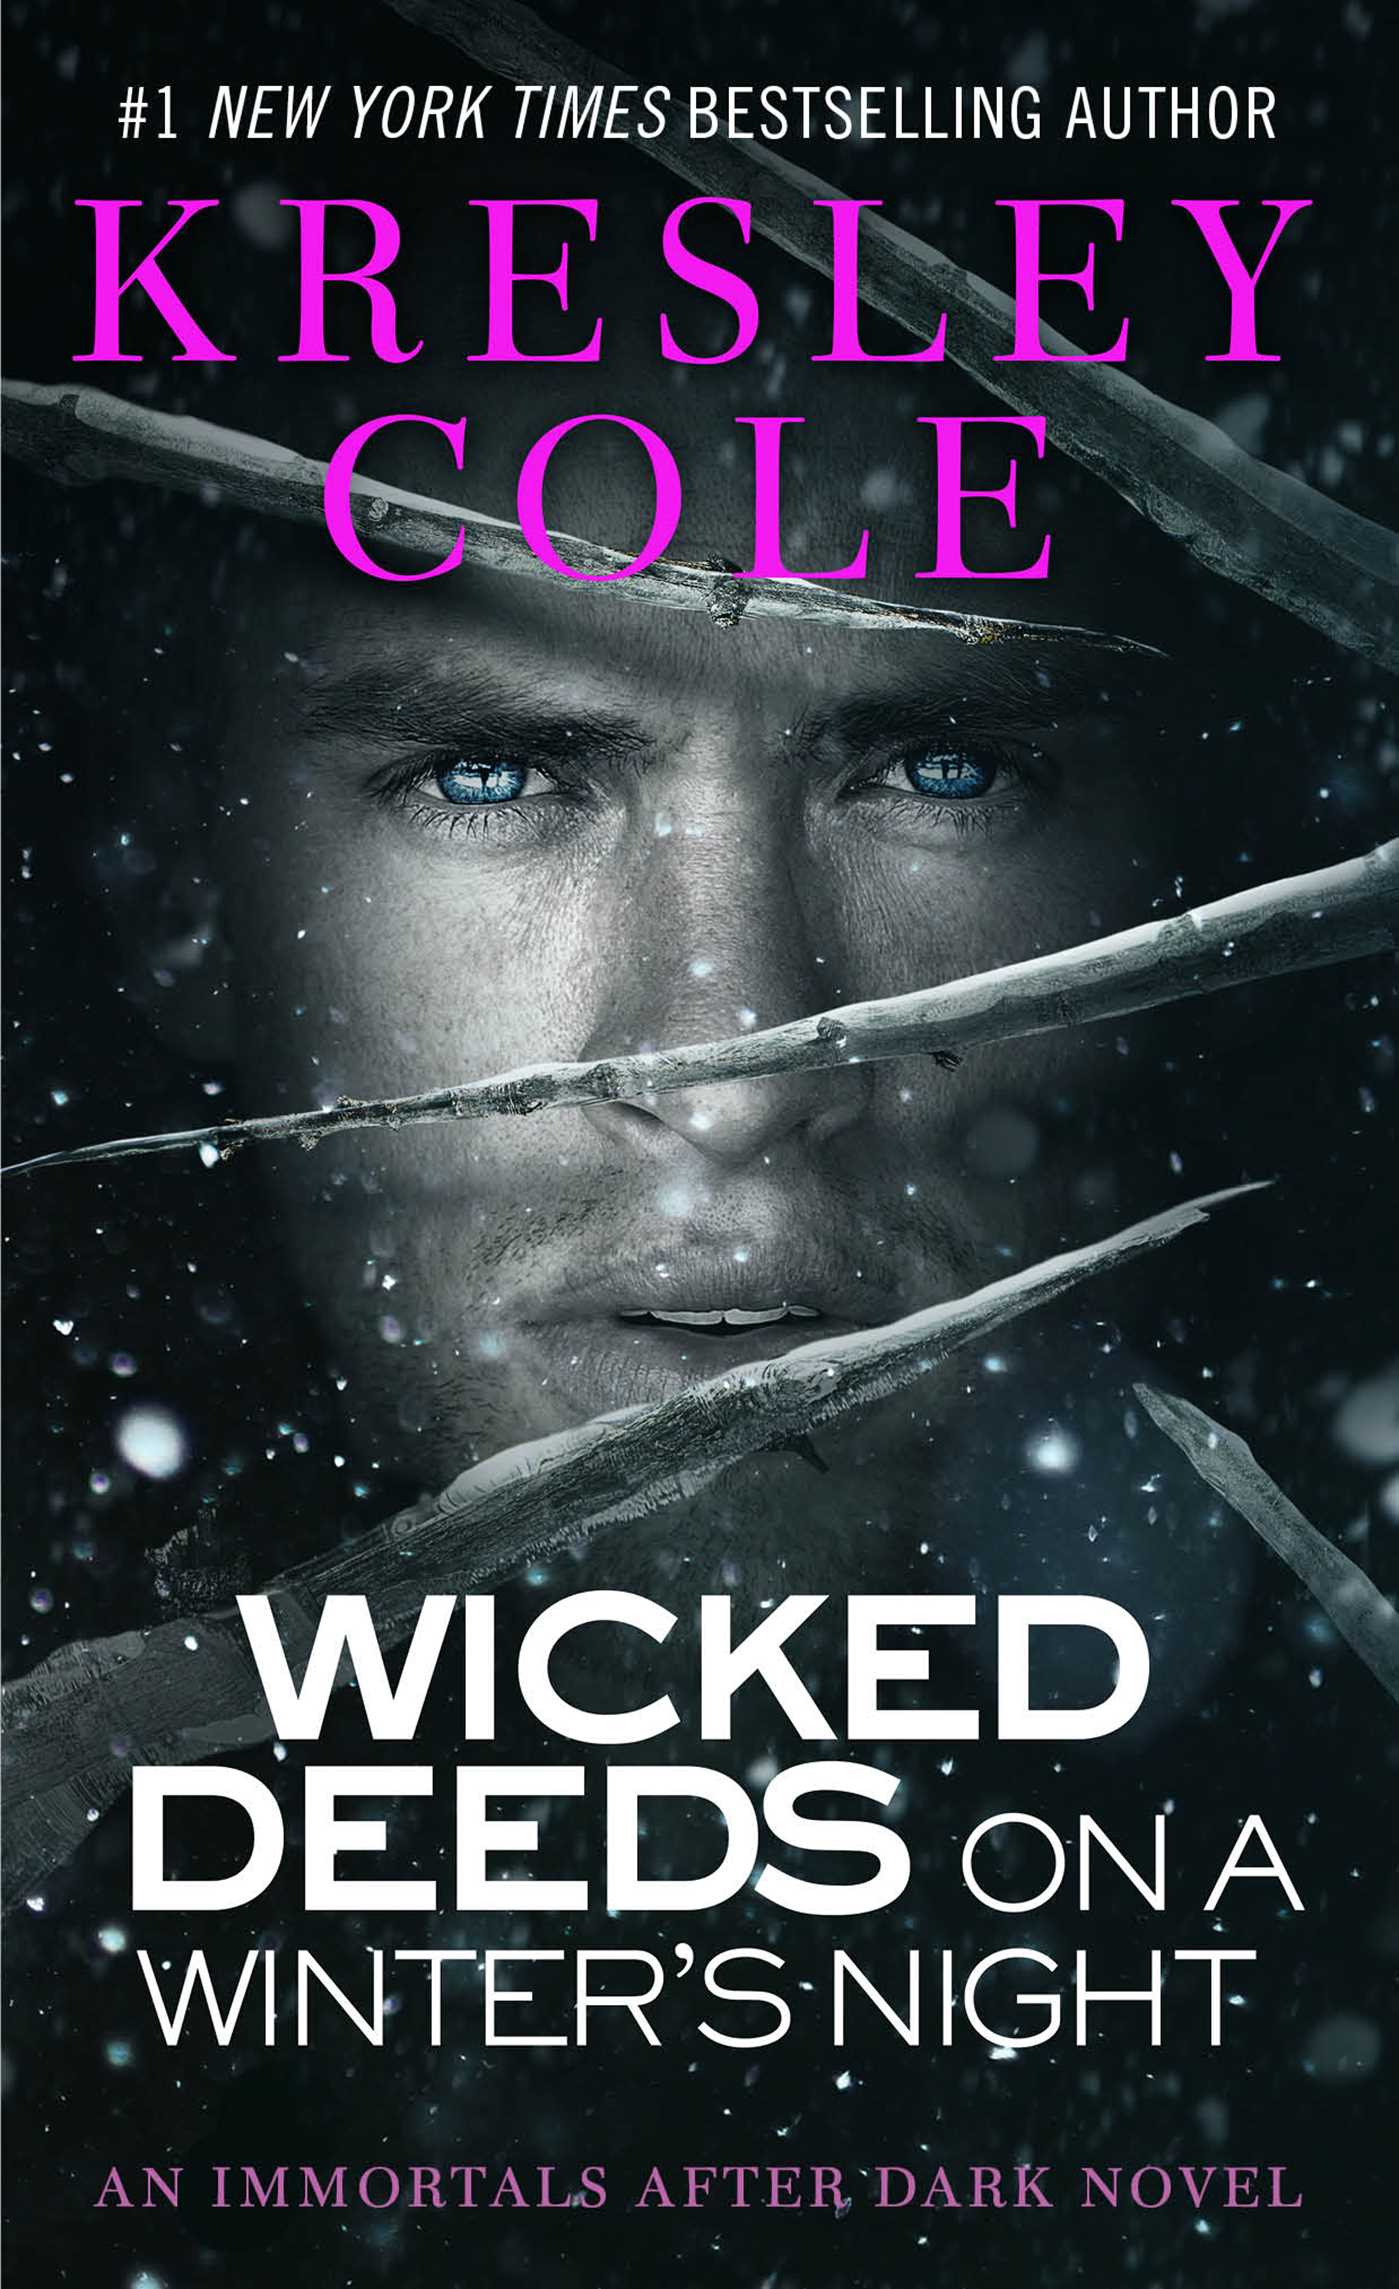 Immortals After Dark: Wicked Deeds on a Winter's Night (Series #4) (Paperback) - image 1 of 1